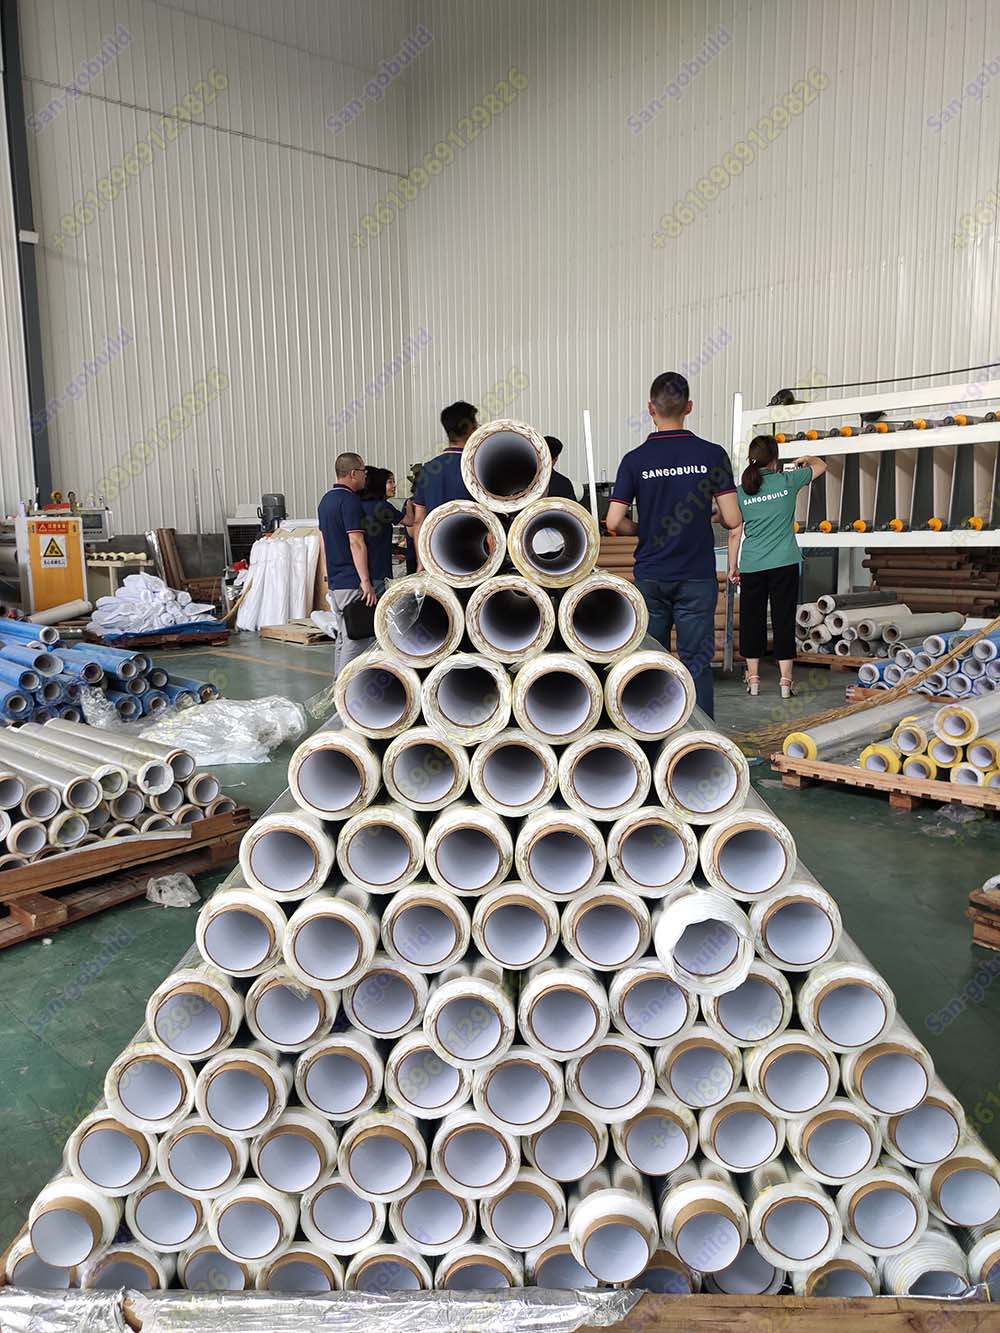 San-gobuild team members from both Hangzhou and Tianjin Branch visit to our butyl tape factory in Jinan Province.